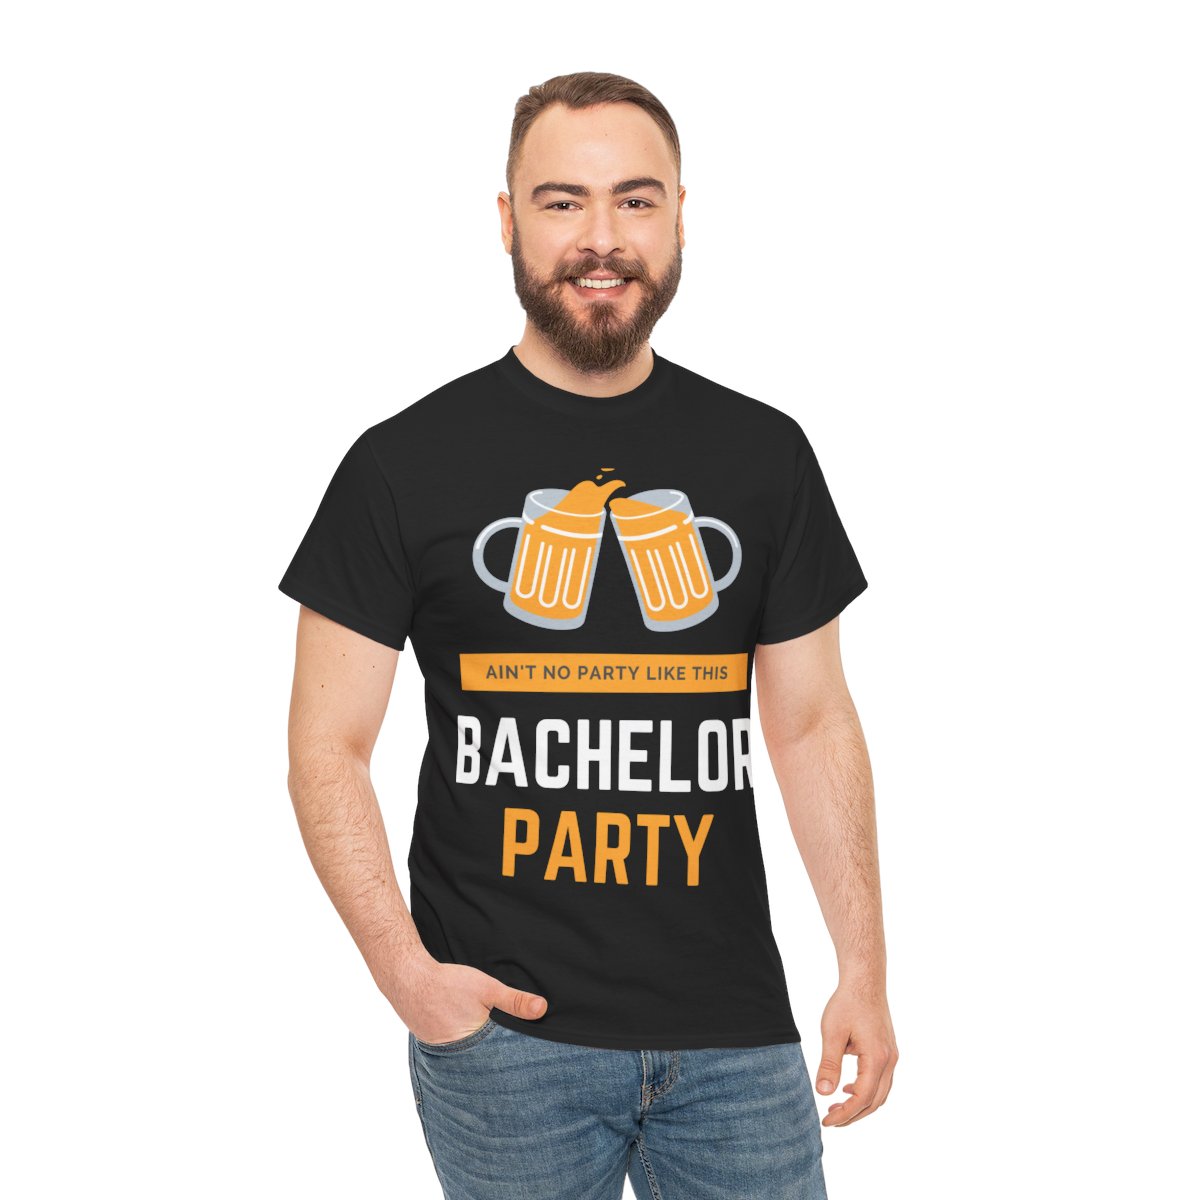 Bachelor’s party